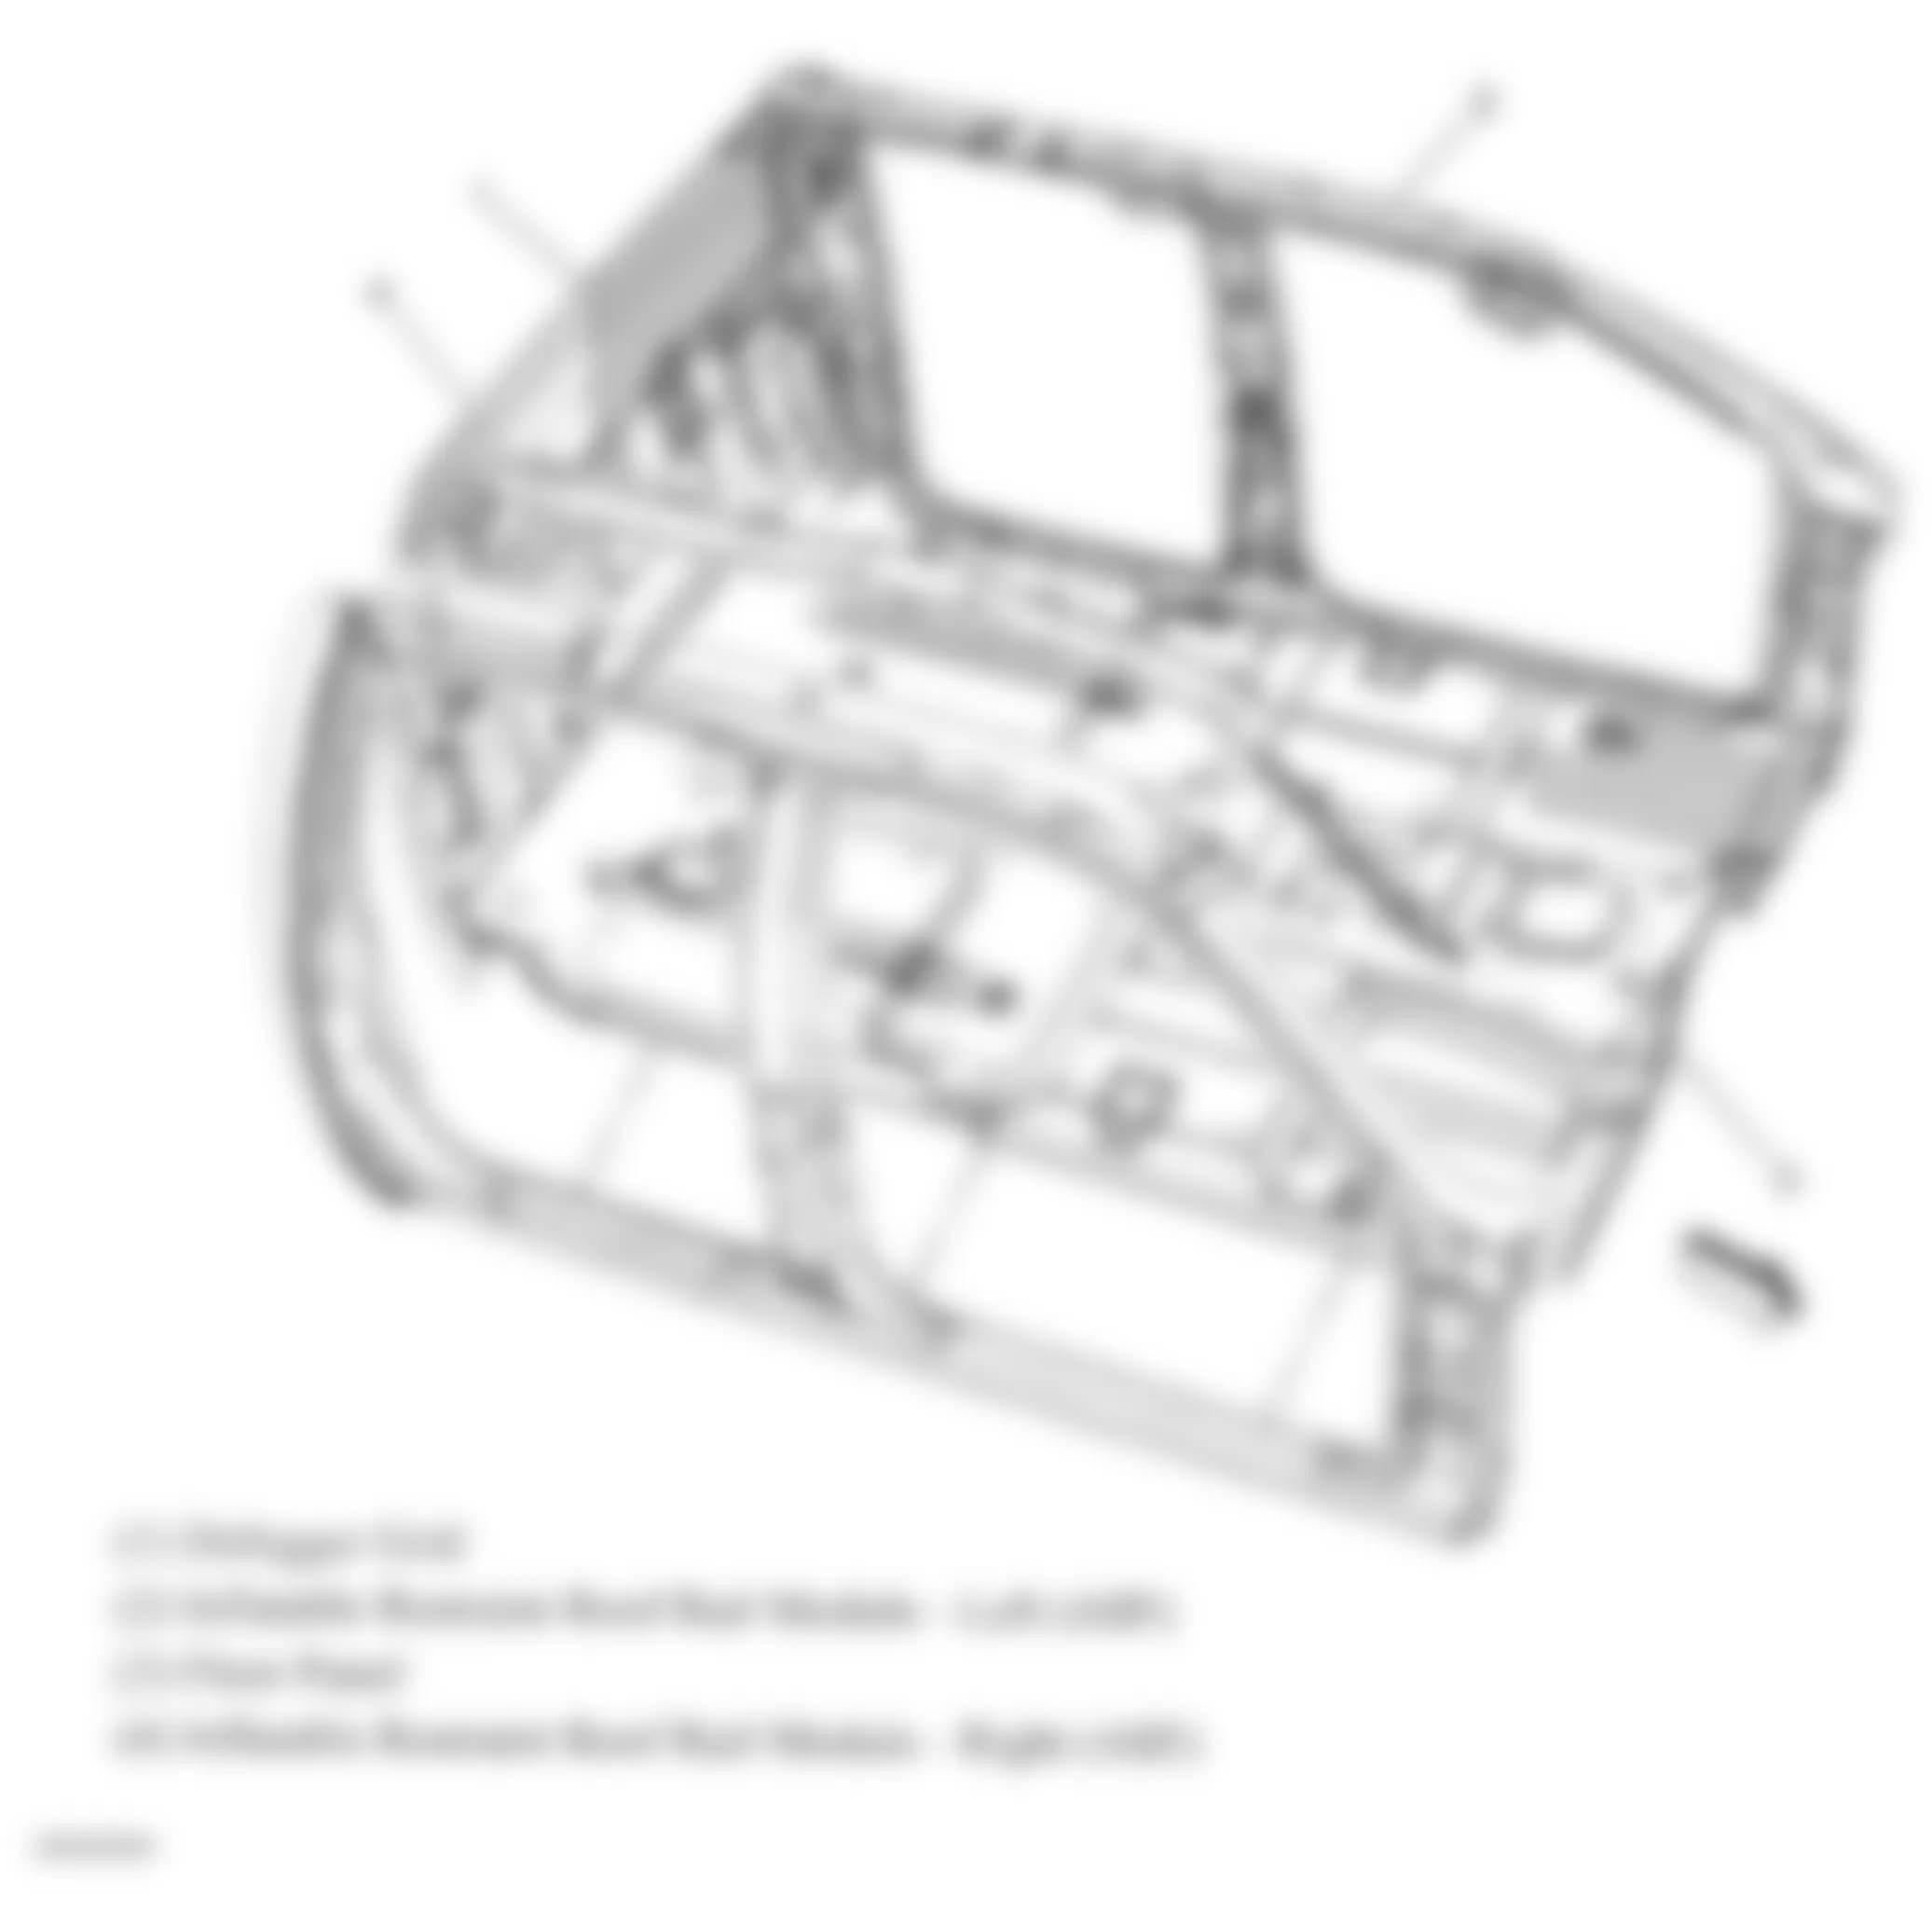 GMC Sierra 2500 HD 2010 - Component Locations -  Roof Rail Air Bags (Extended Cab & Crew Cab)